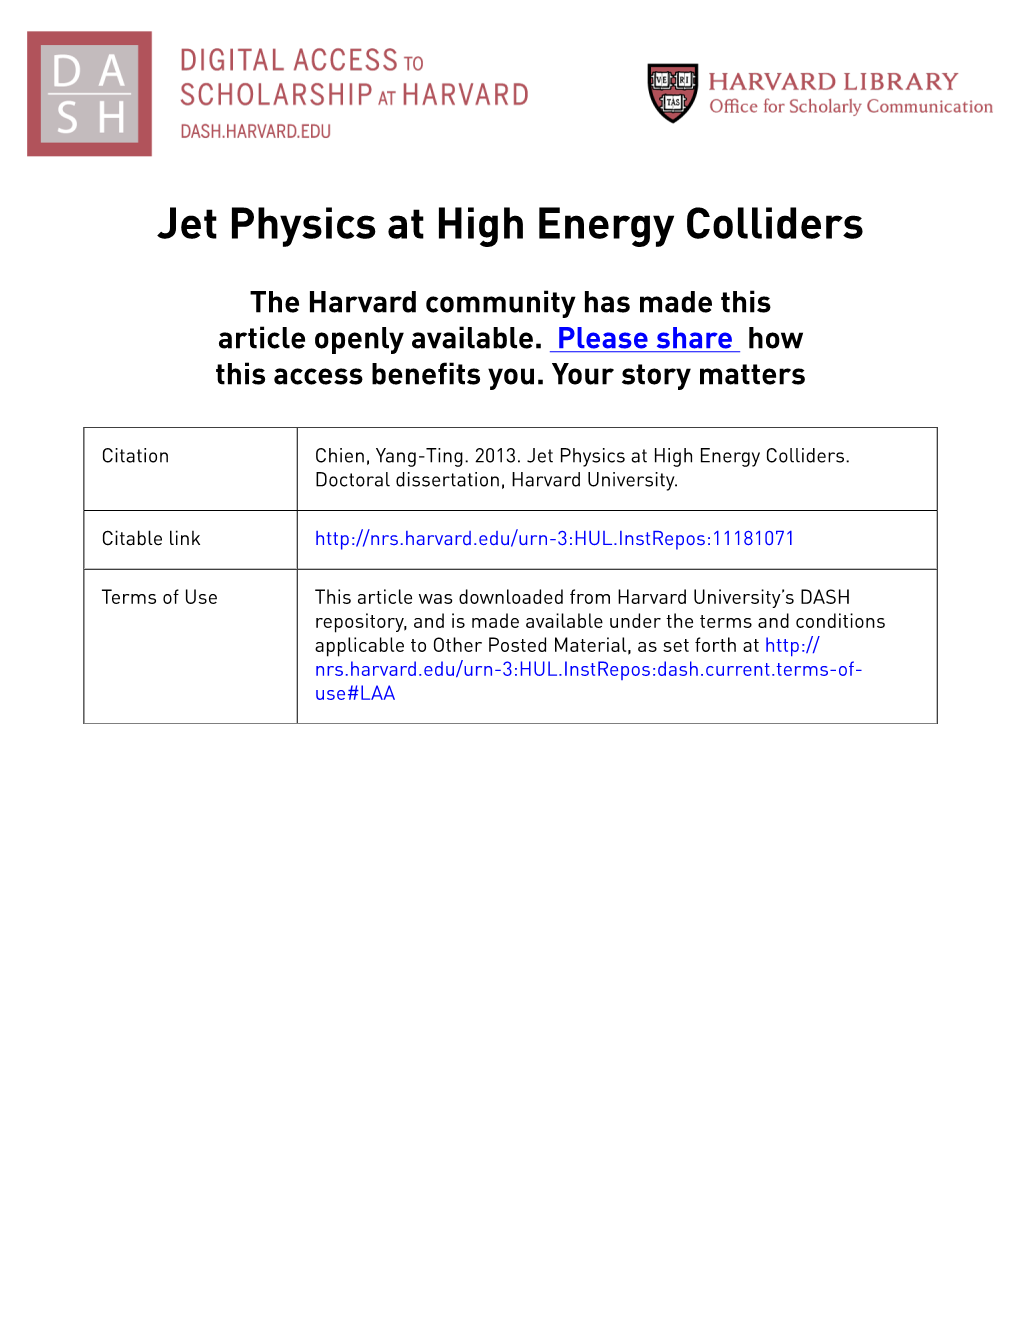 Jet Physics at High Energy Colliders